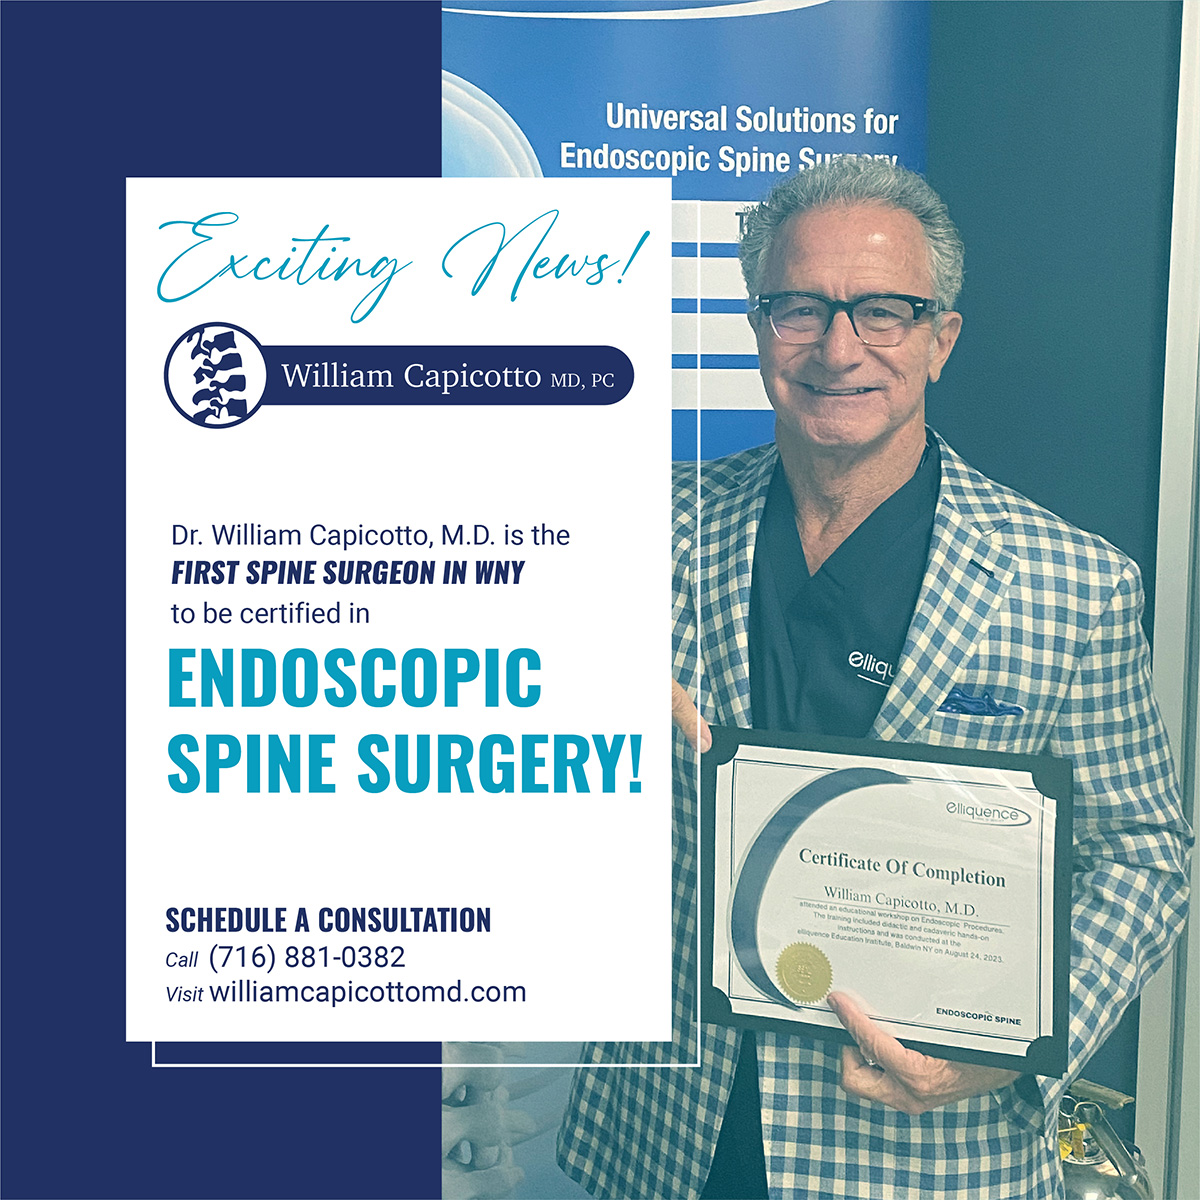 Dr. William Capicotto, M.D. is the FIRST spine surgeon in Western New York to be certified in endoscopic, or arthroscopic, spine surgery!